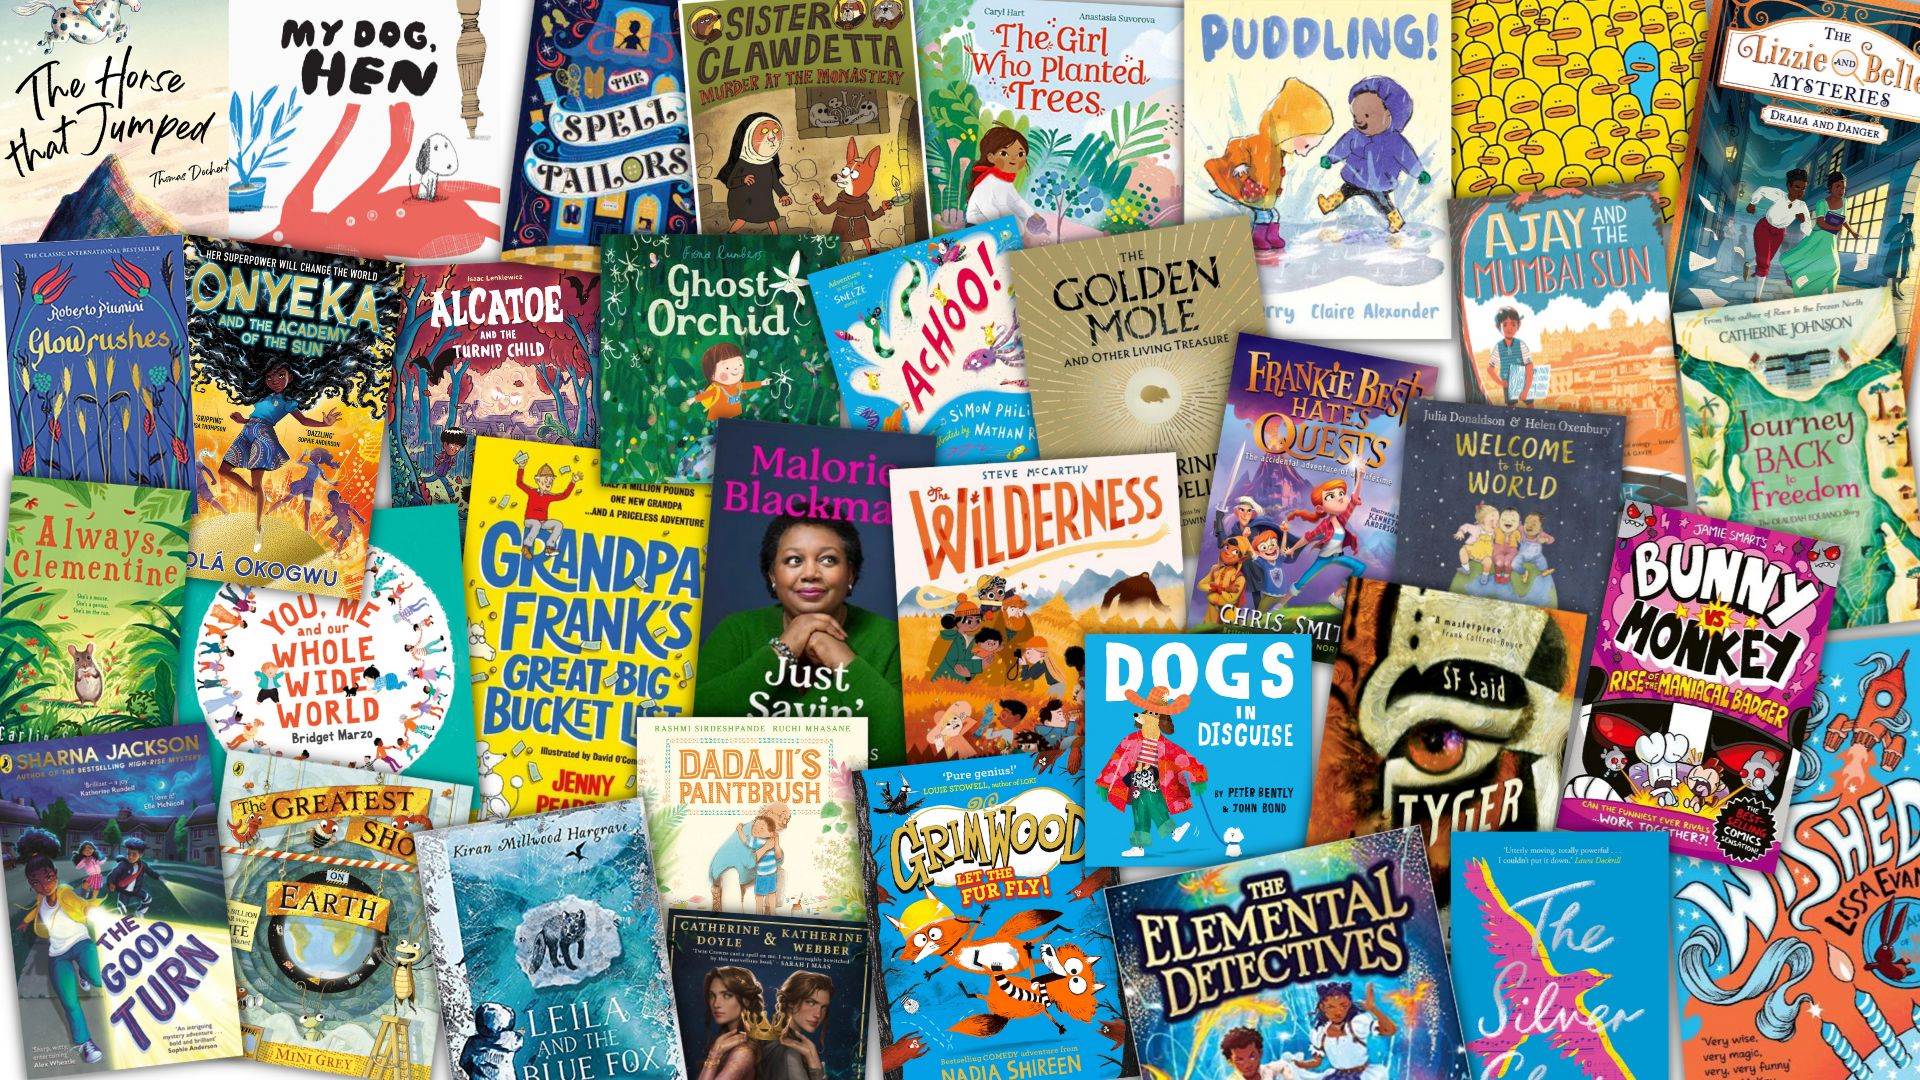 The best children's books of the year, chosen by authors and illustrators